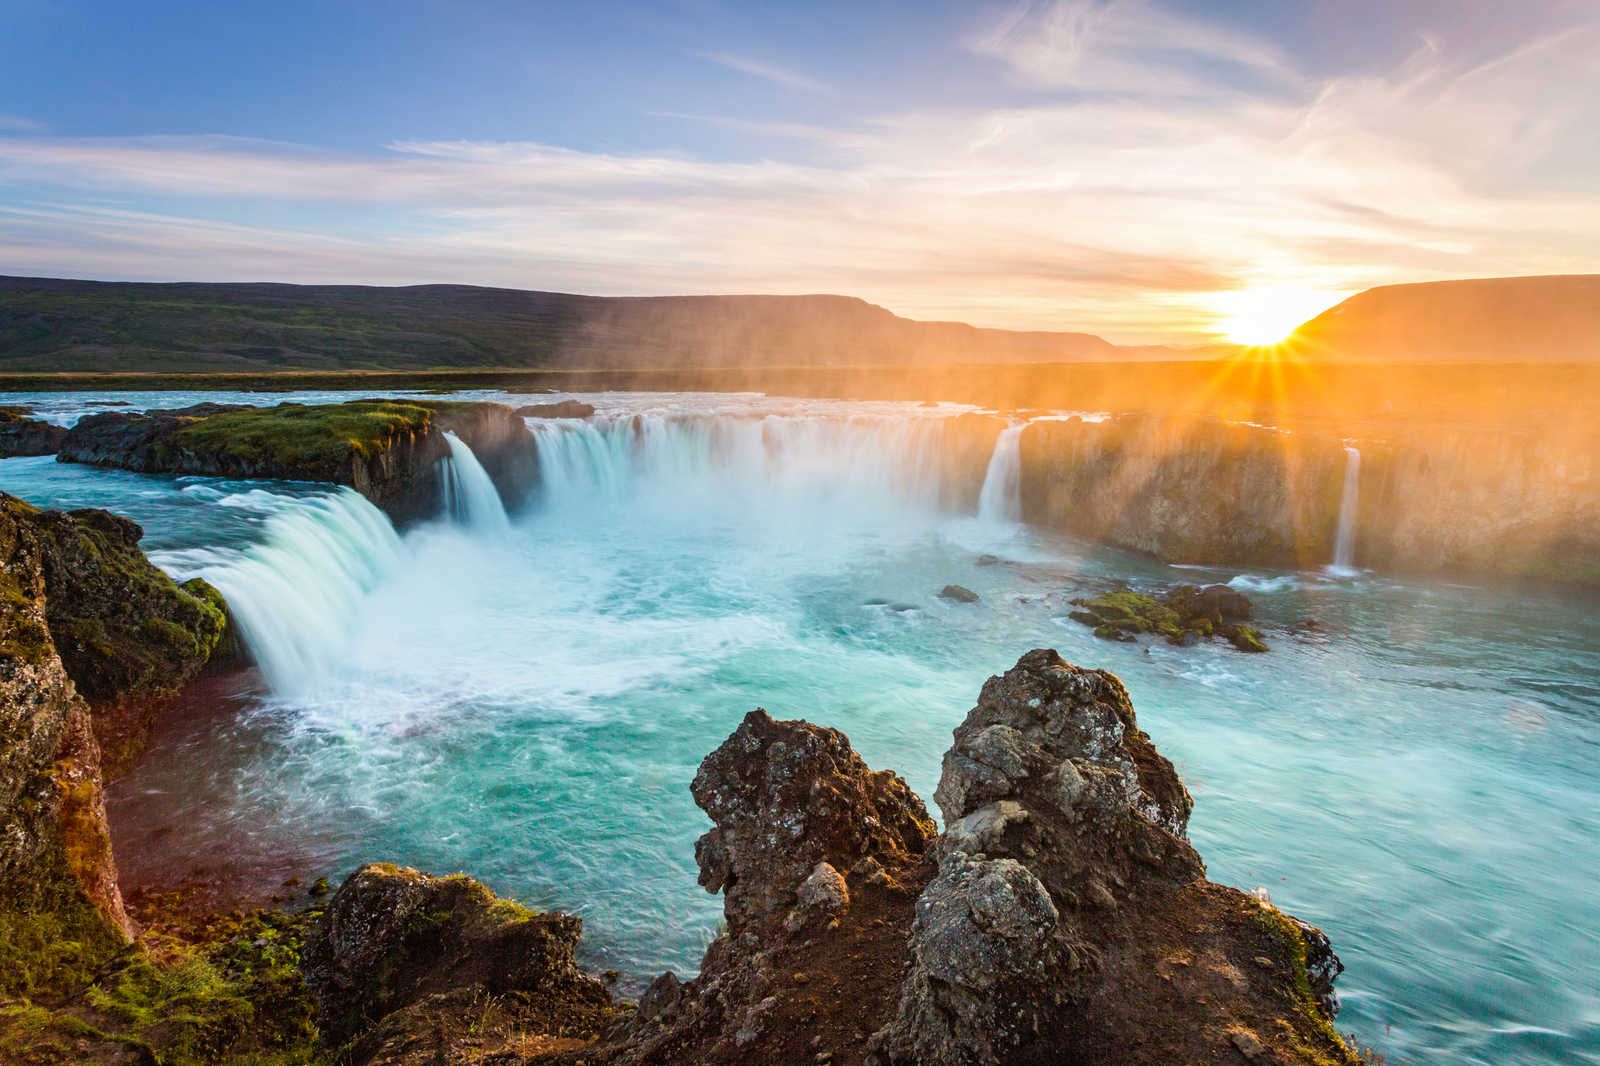             Godafoss Iceland - Canvas painting with waterfall panorama - 0.90 m x 0.60 m
        